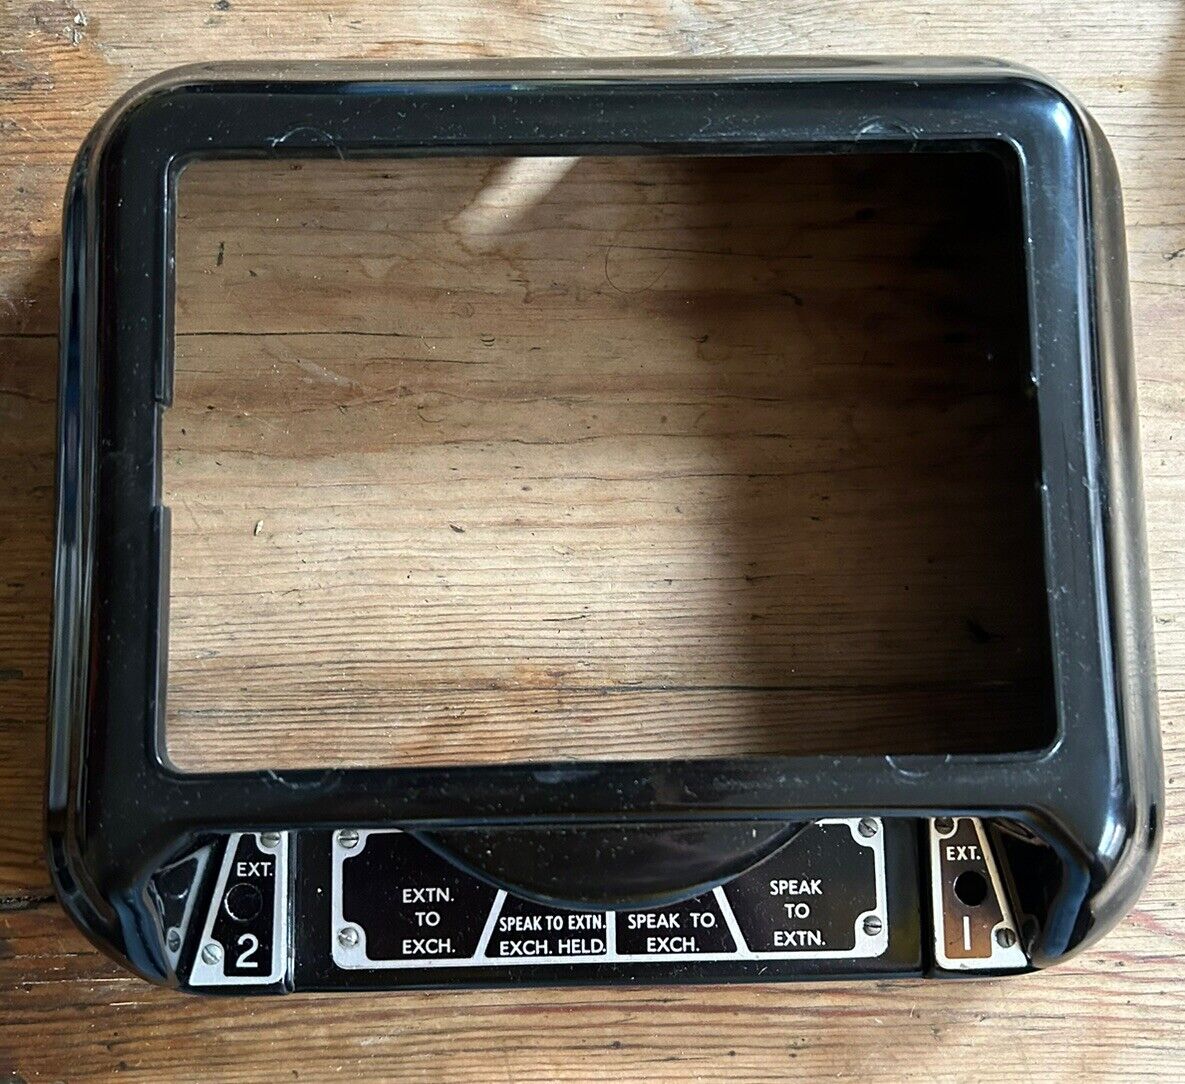 GPO Telephone 248, moulded case for base